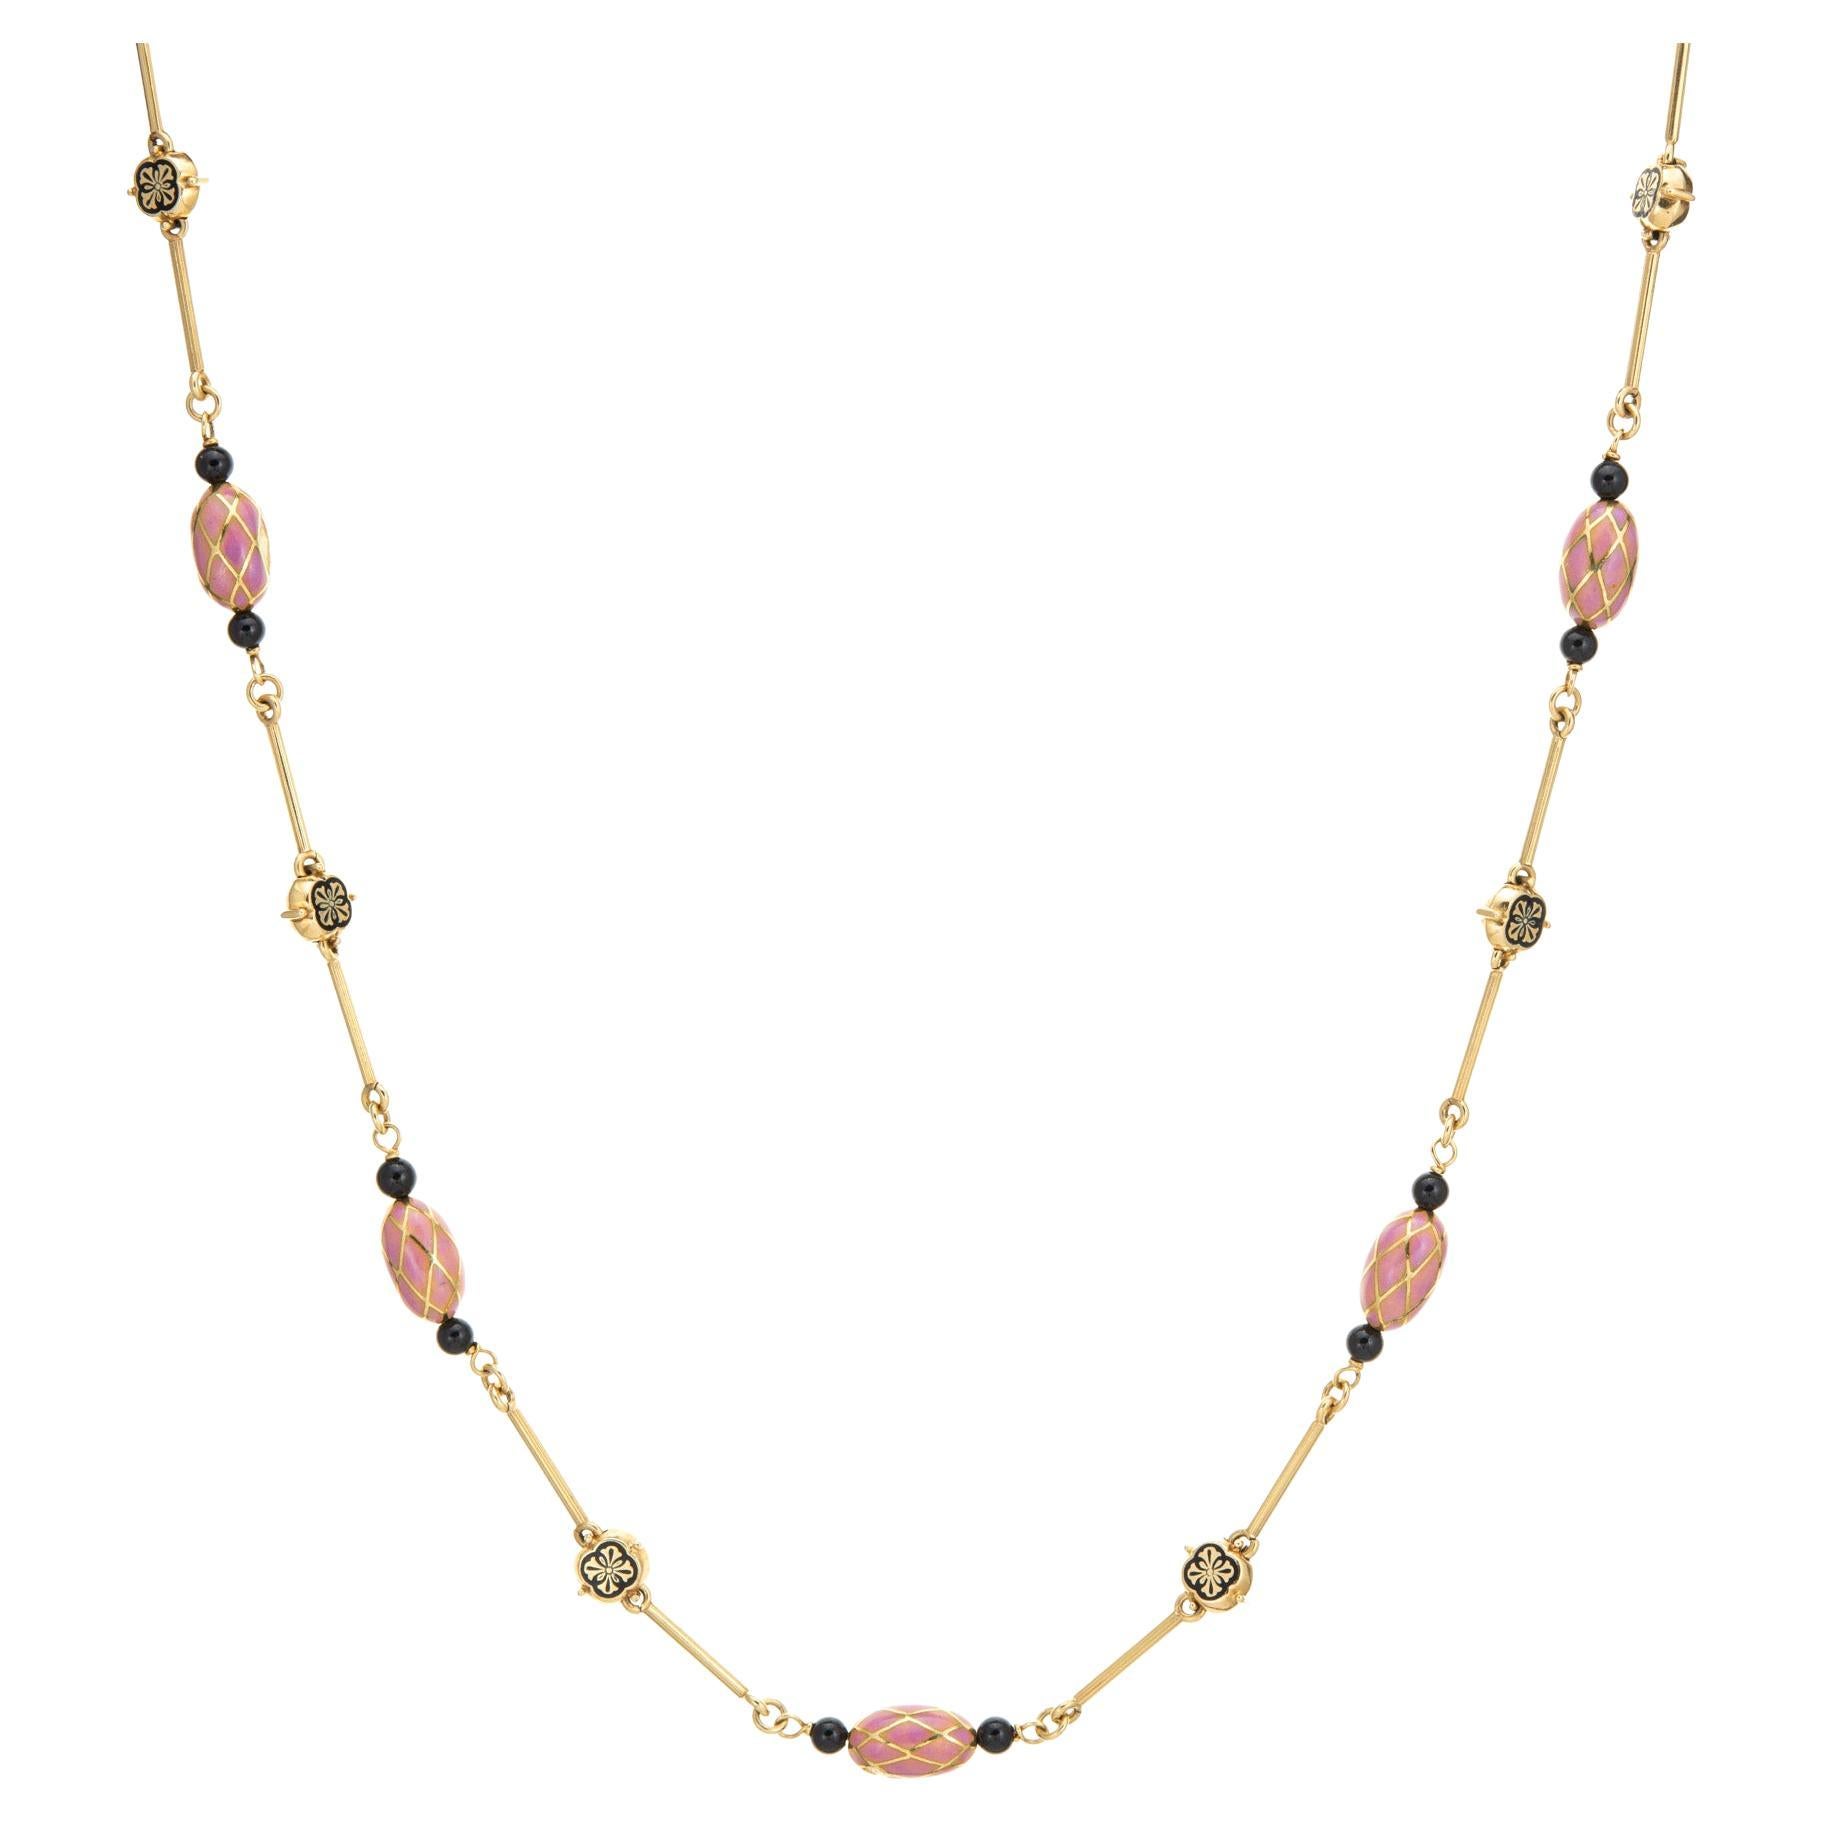 Vintage French Import Enamel Necklace 18k Yellow Gold Long 27" Pink Black Onyx